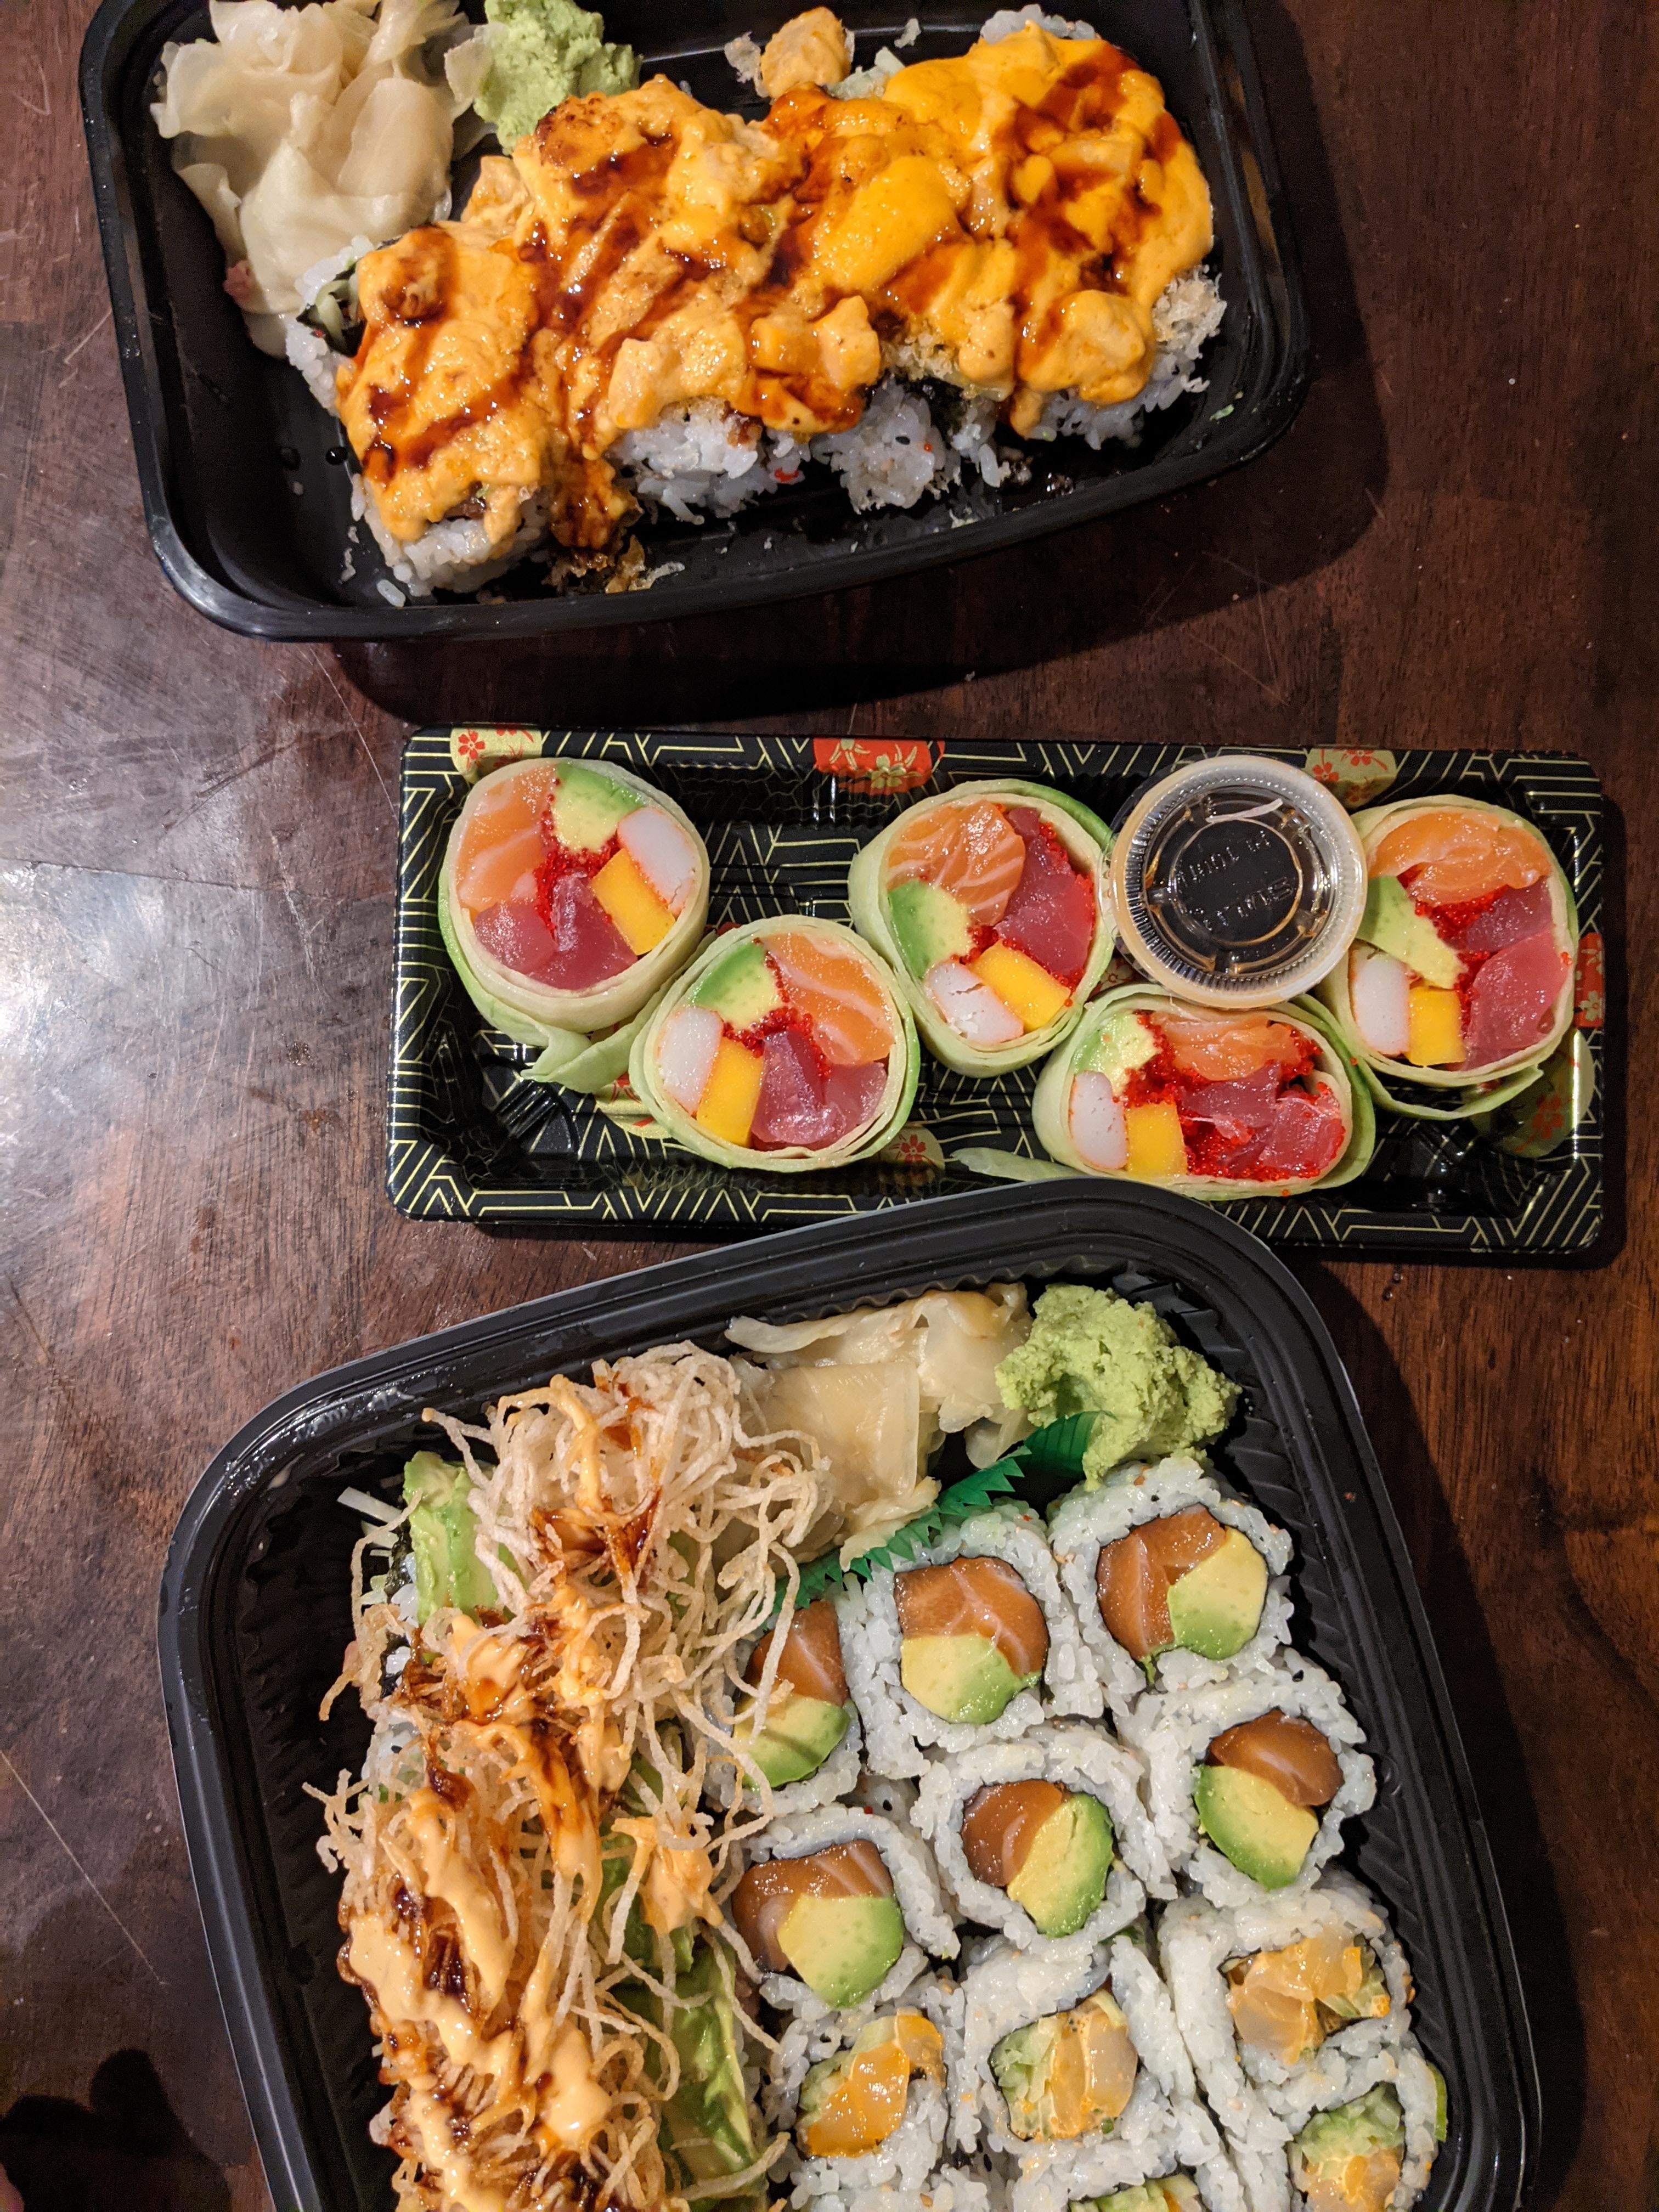 Didn't feel like cooking tonight so my husband picked up some sushi on the  way home! - Dining and Cooking